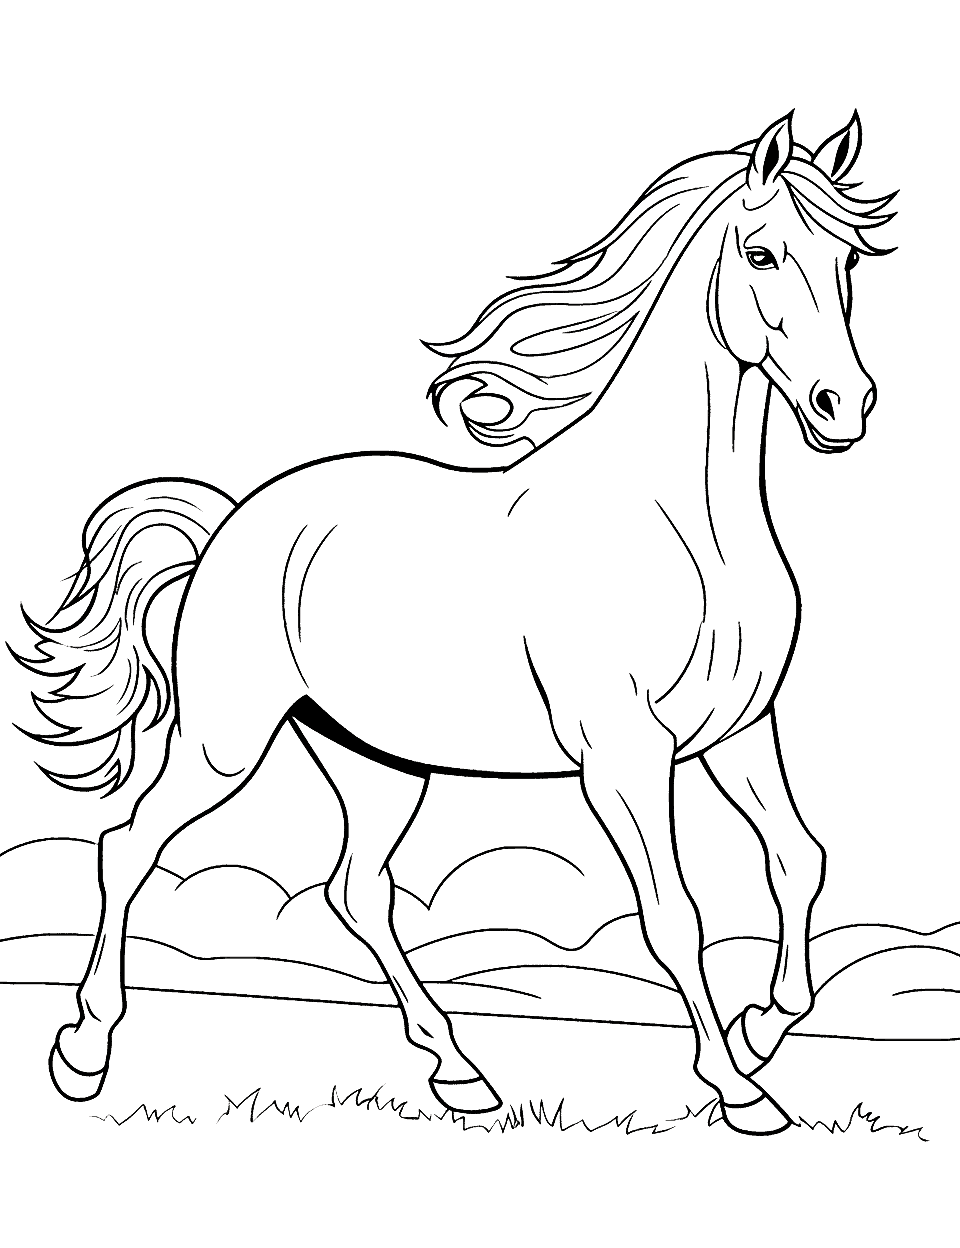 Majestic Horse Animal Coloring Page - A regal horse galloping freely in an open field.